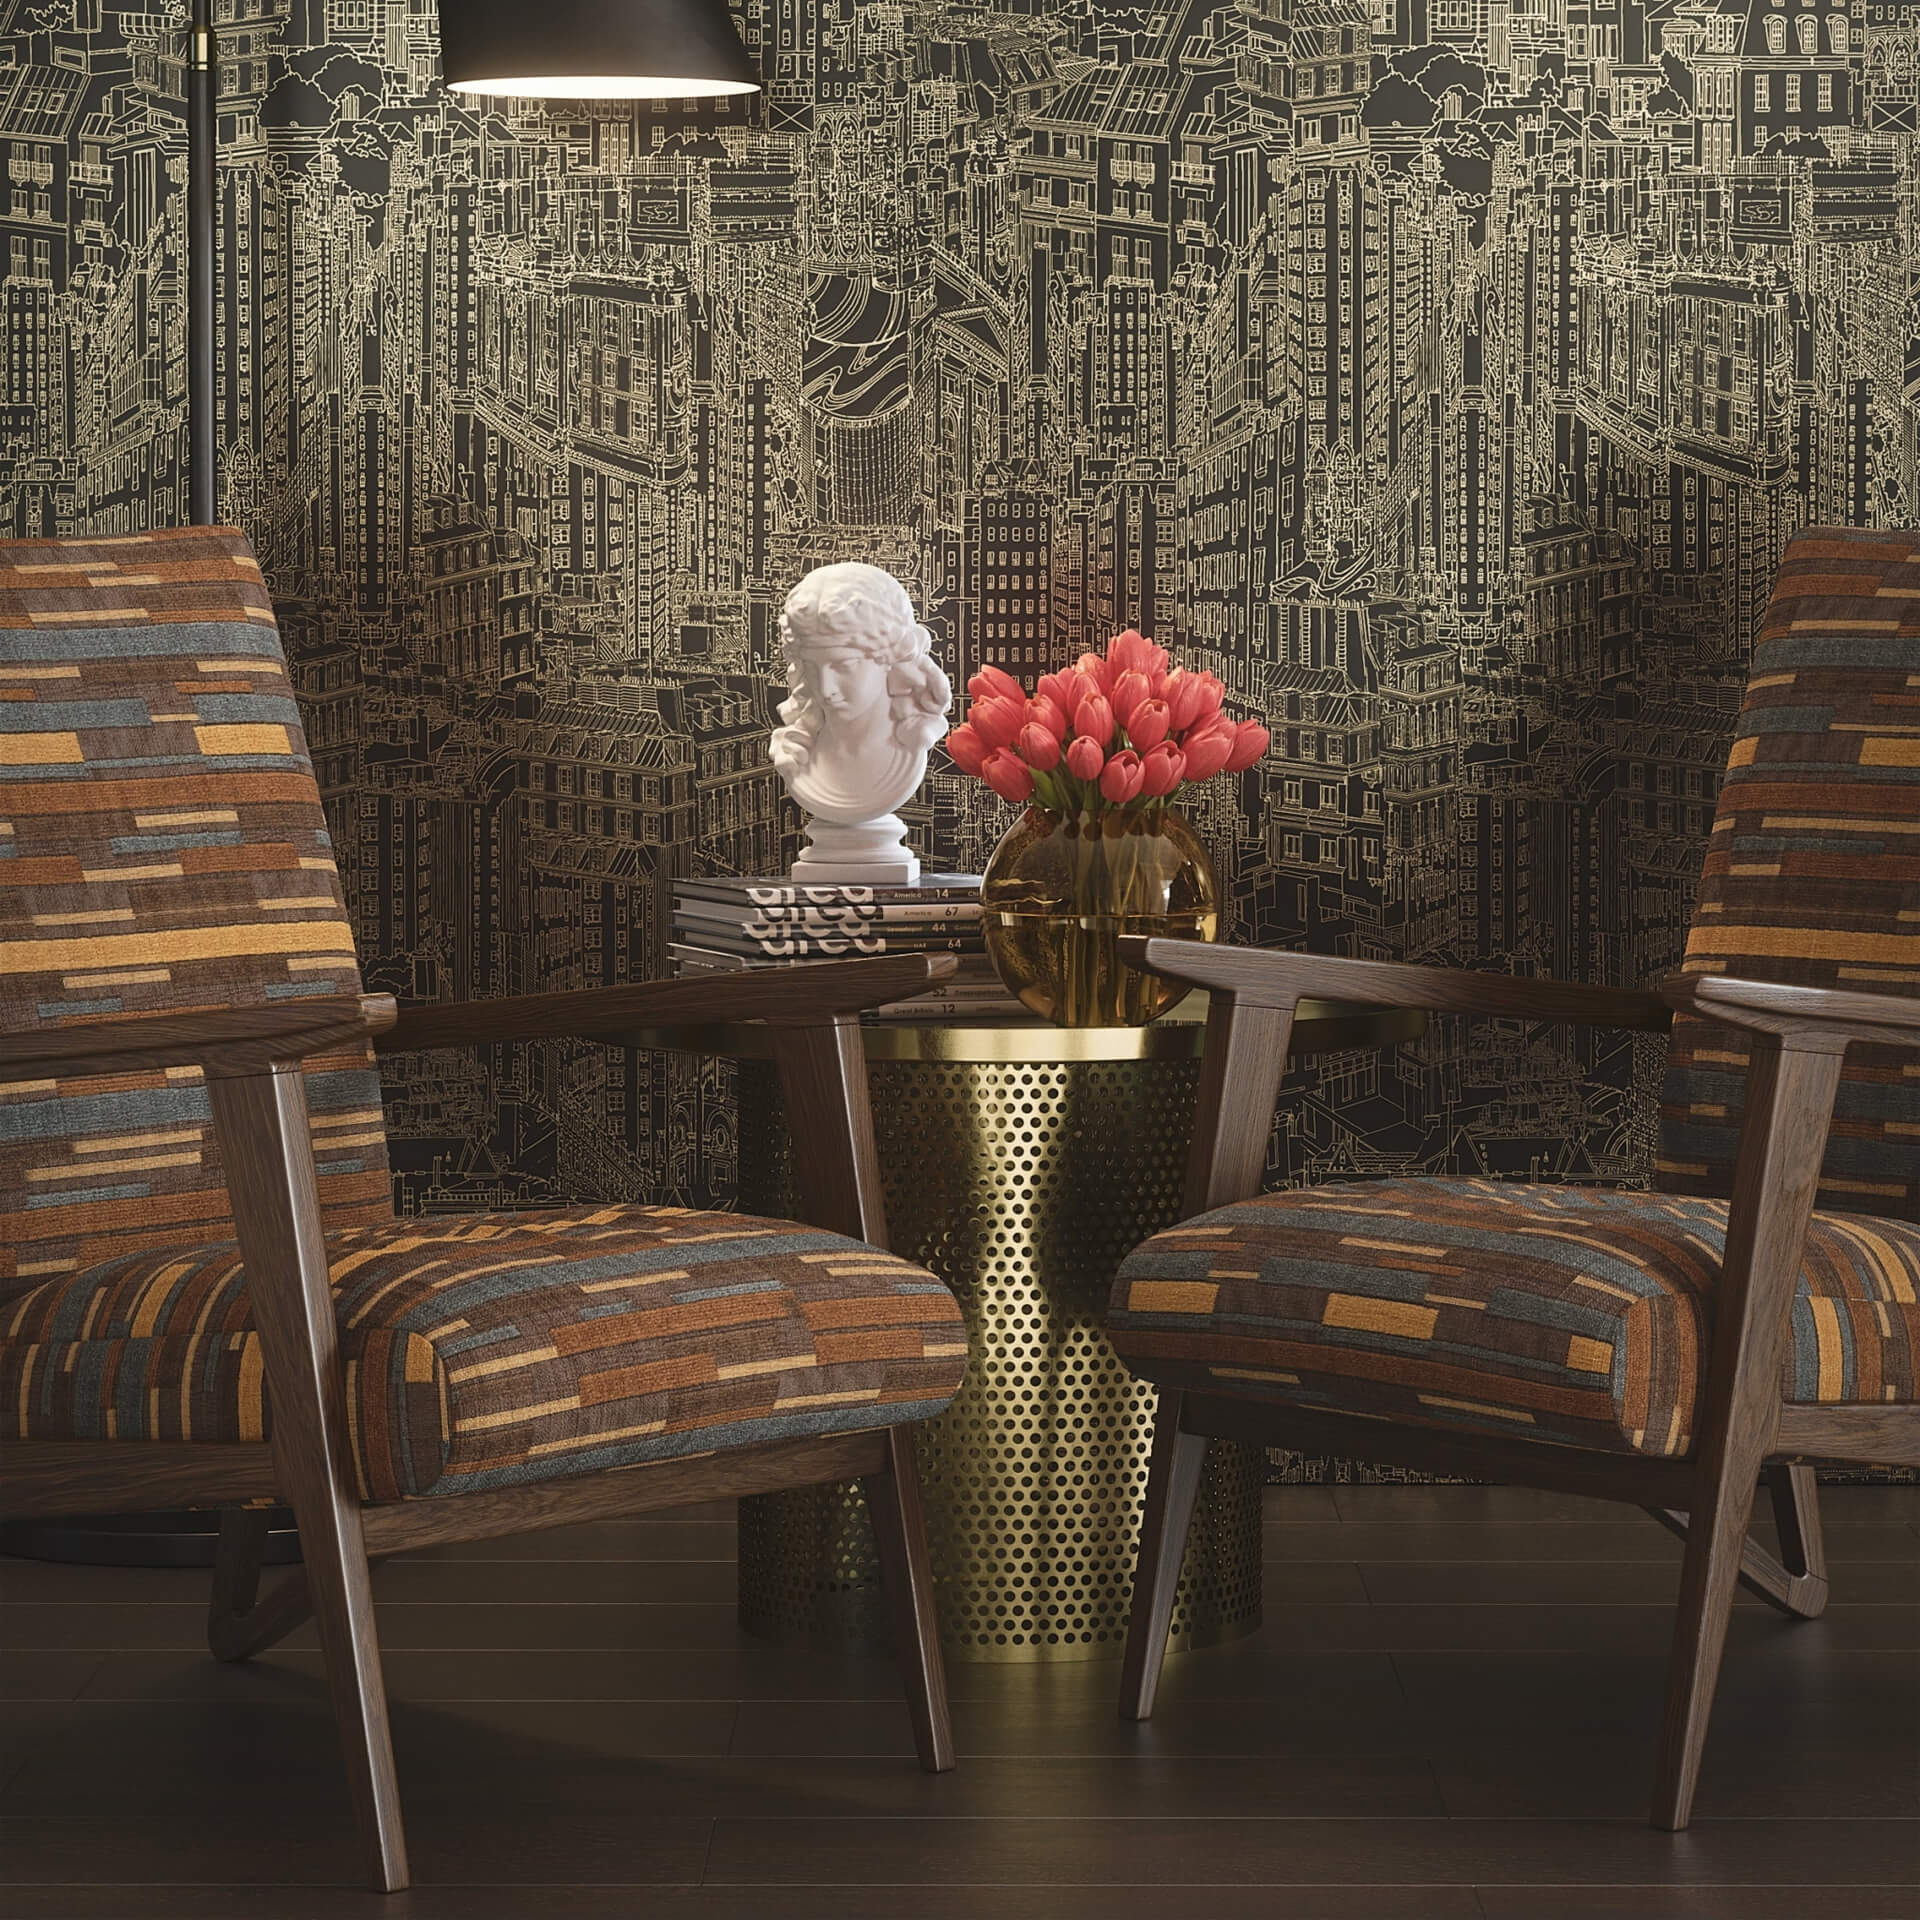 Lifestyle 3D Rendering of Patterned Fabric on Chairs